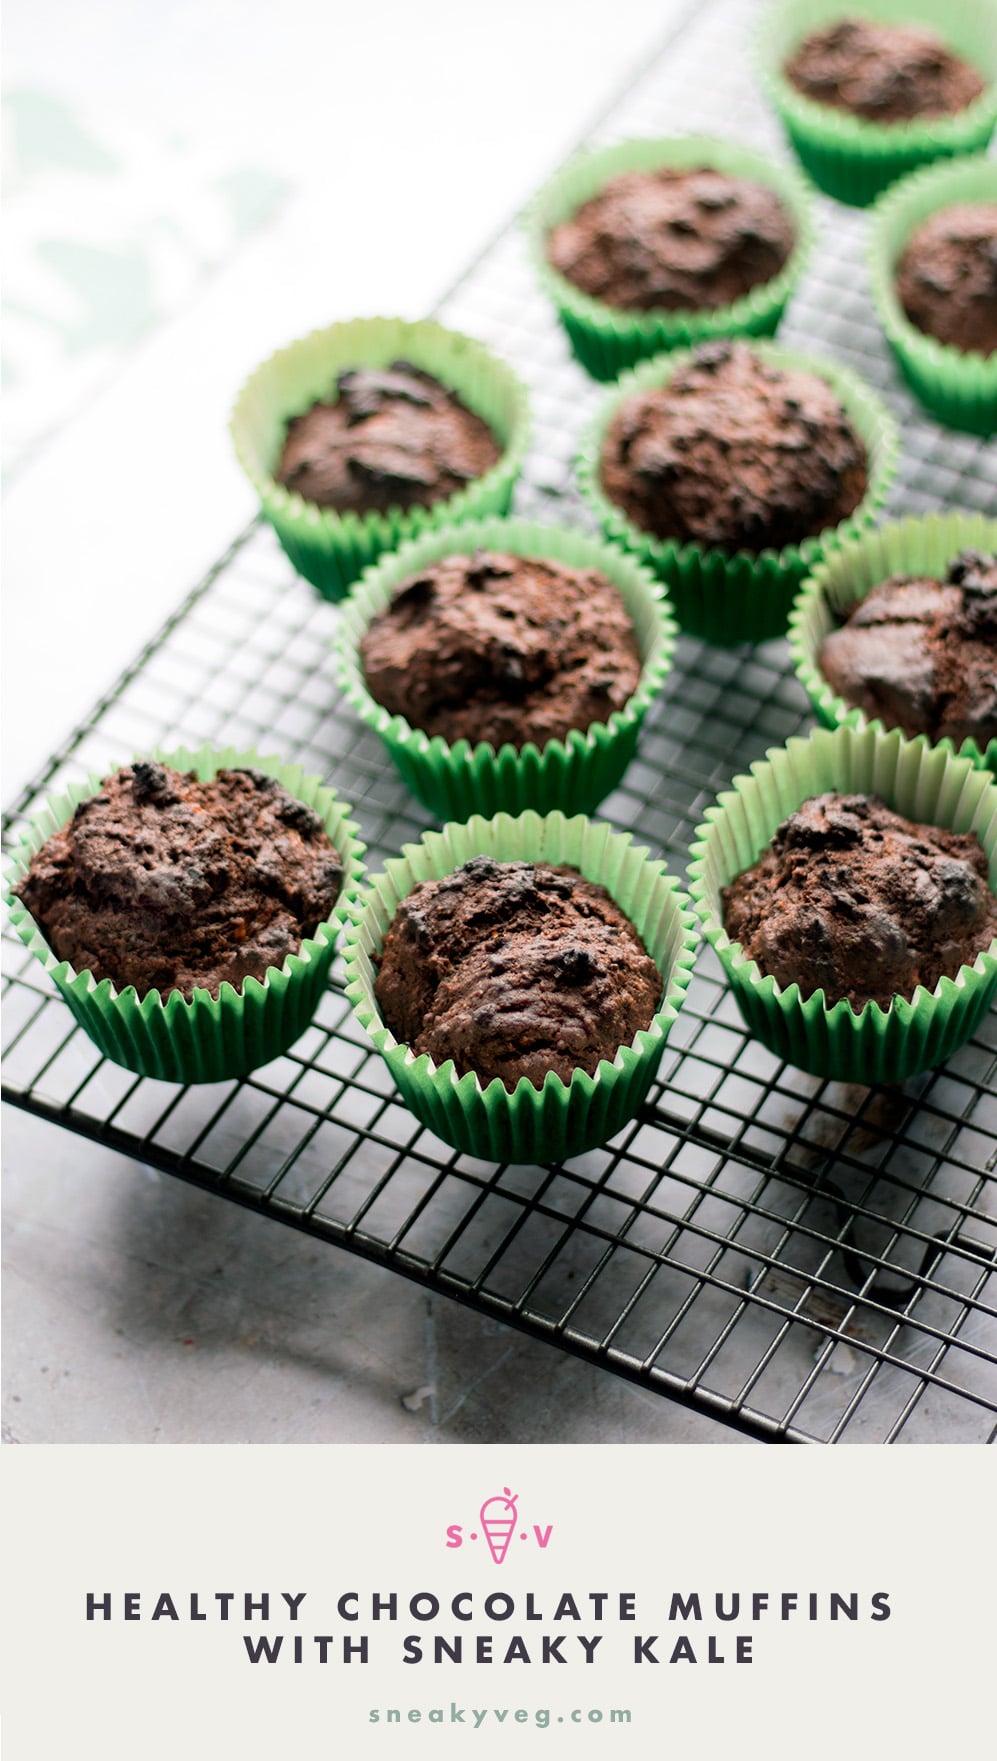 Healthy chocolate muffins with sneaky kale